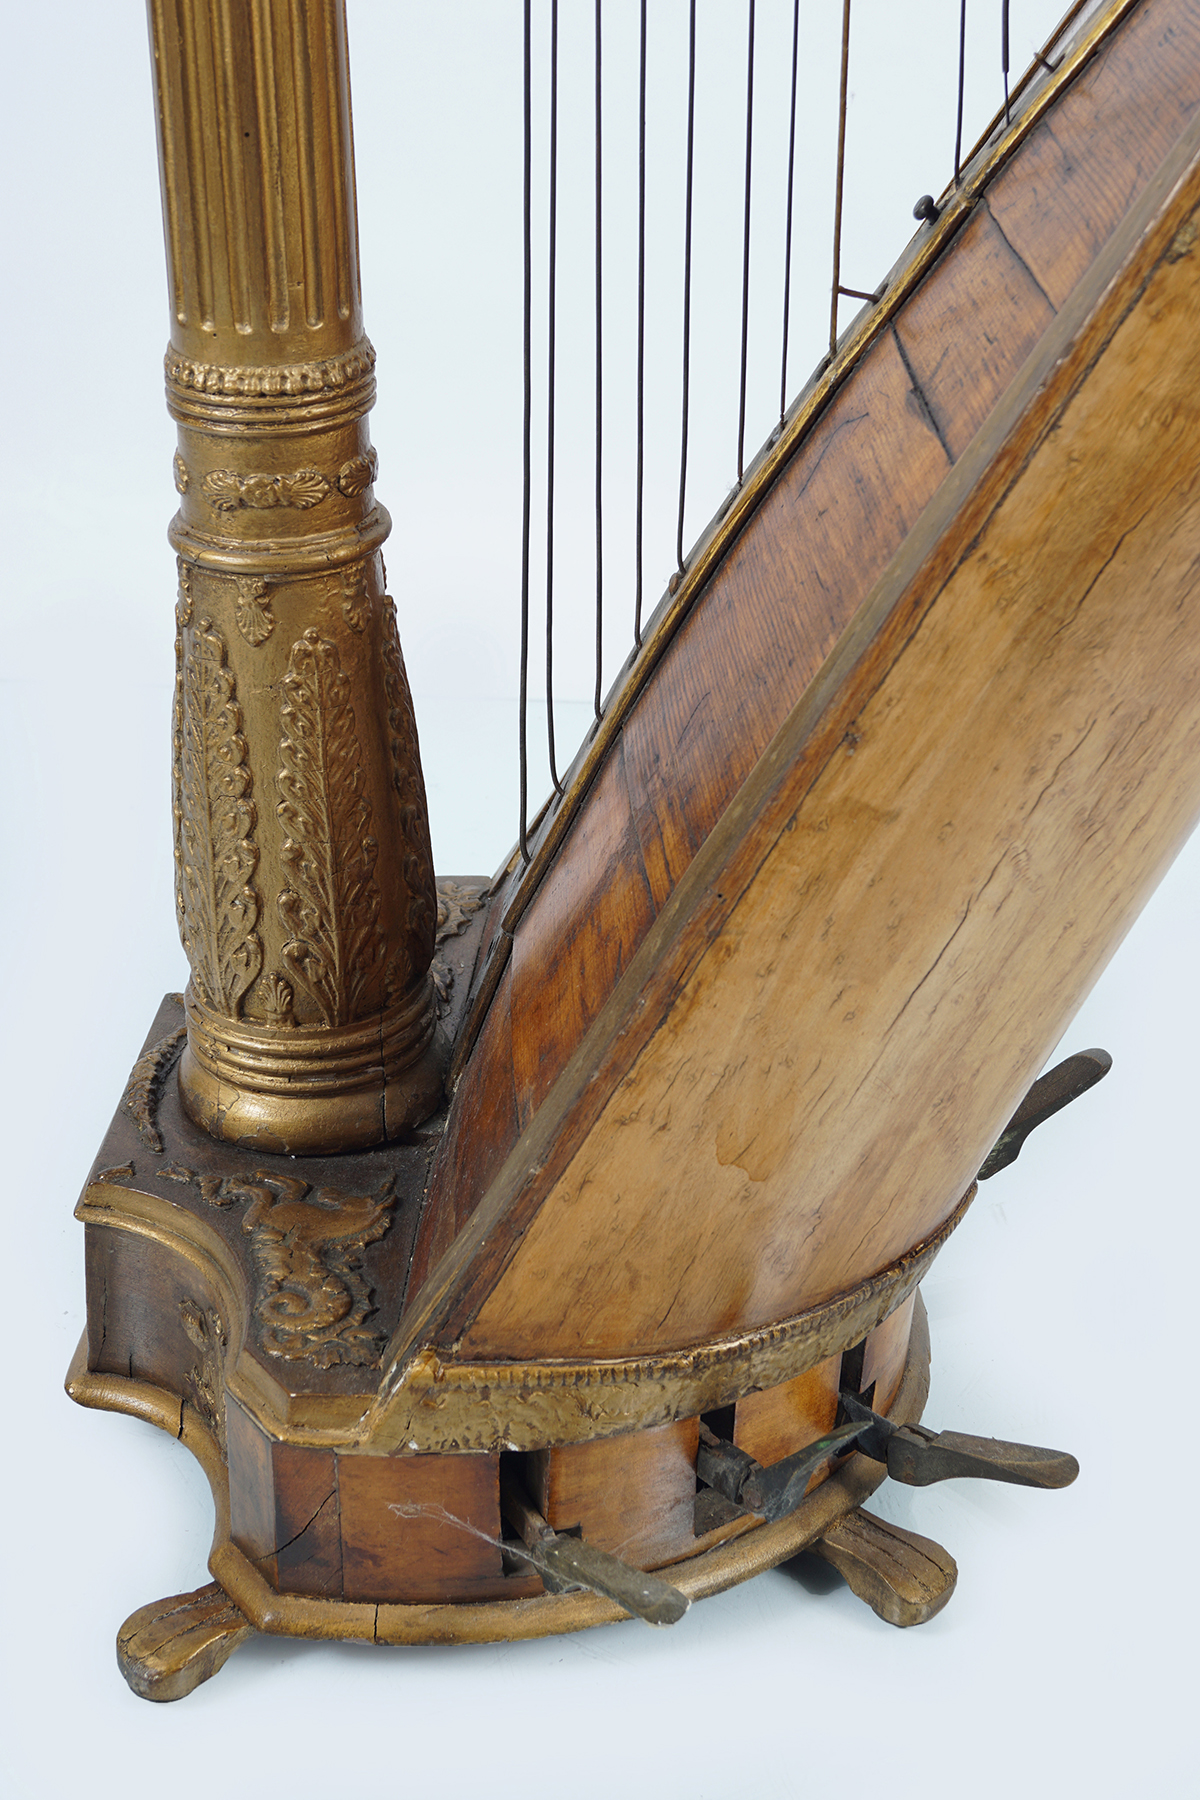 19TH-CENTURY WALNUT AND PARCEL GILT CONCERT HARP - Image 2 of 7